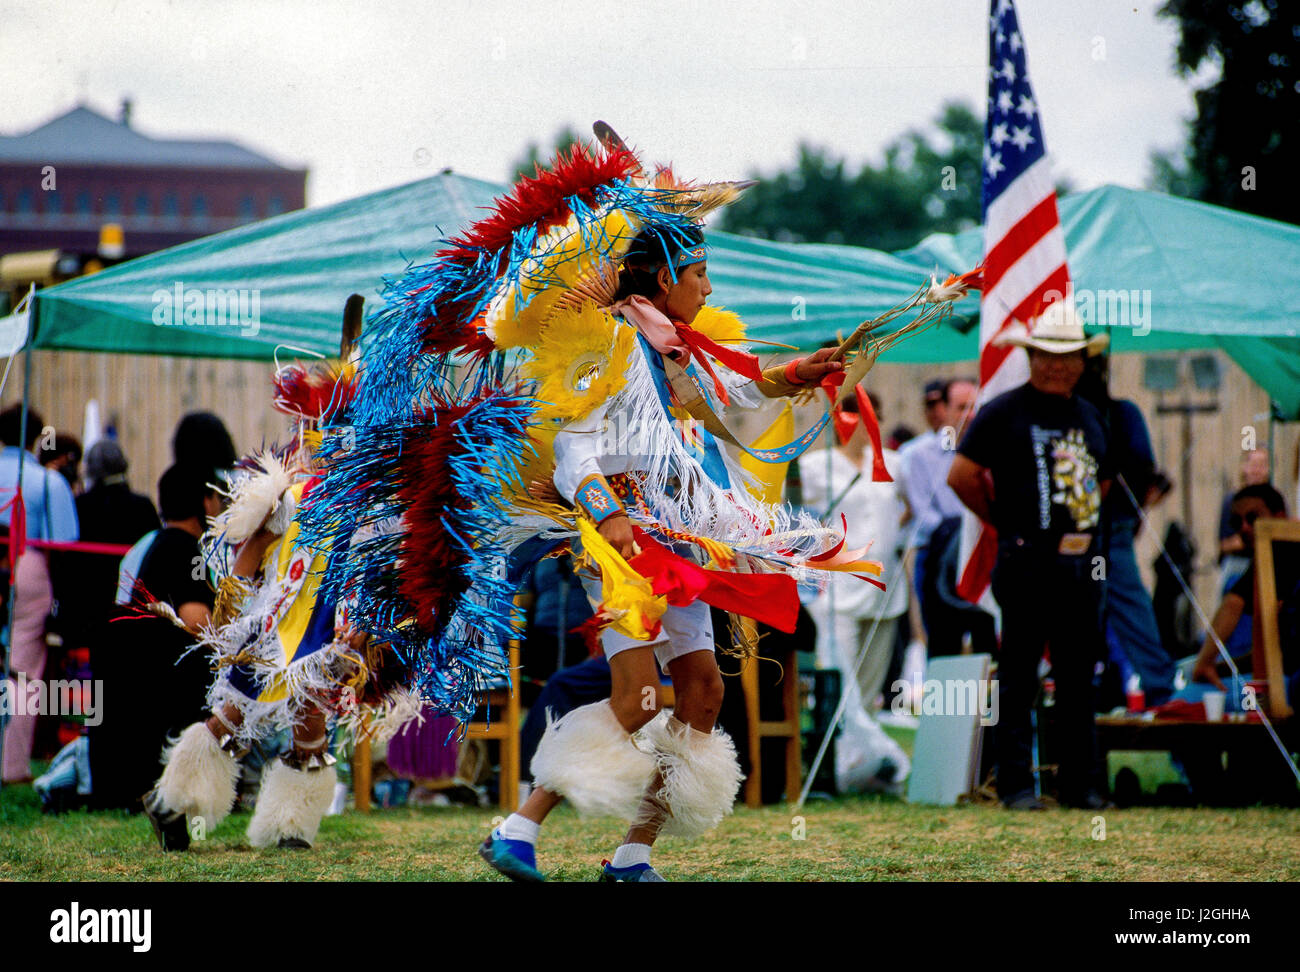 Native American tribal dancer performs during the Smithsonian's National Folk Life festival on the National Mall, Washington DC., June 25, 1995.  Photo by Mark Reinstein Stock Photo